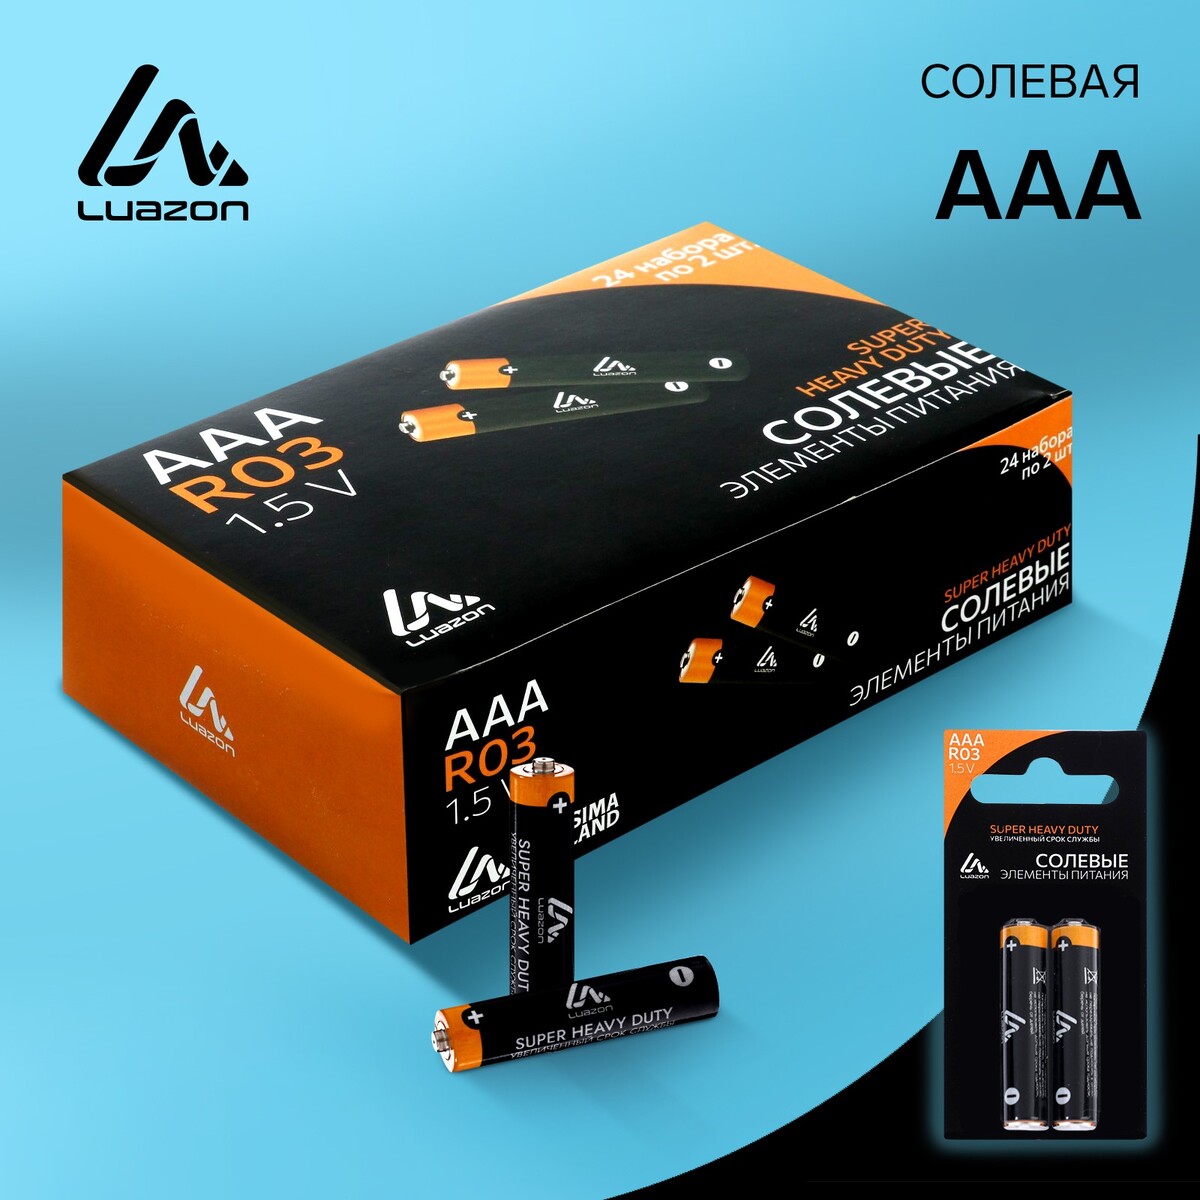 Батарейка солевая luazon super heavy duty, aaa, r03, блистер, 2 шт load ptz heavy duty pan tilt support pelco d protocol and rs485 22 or 30kg different models are optional